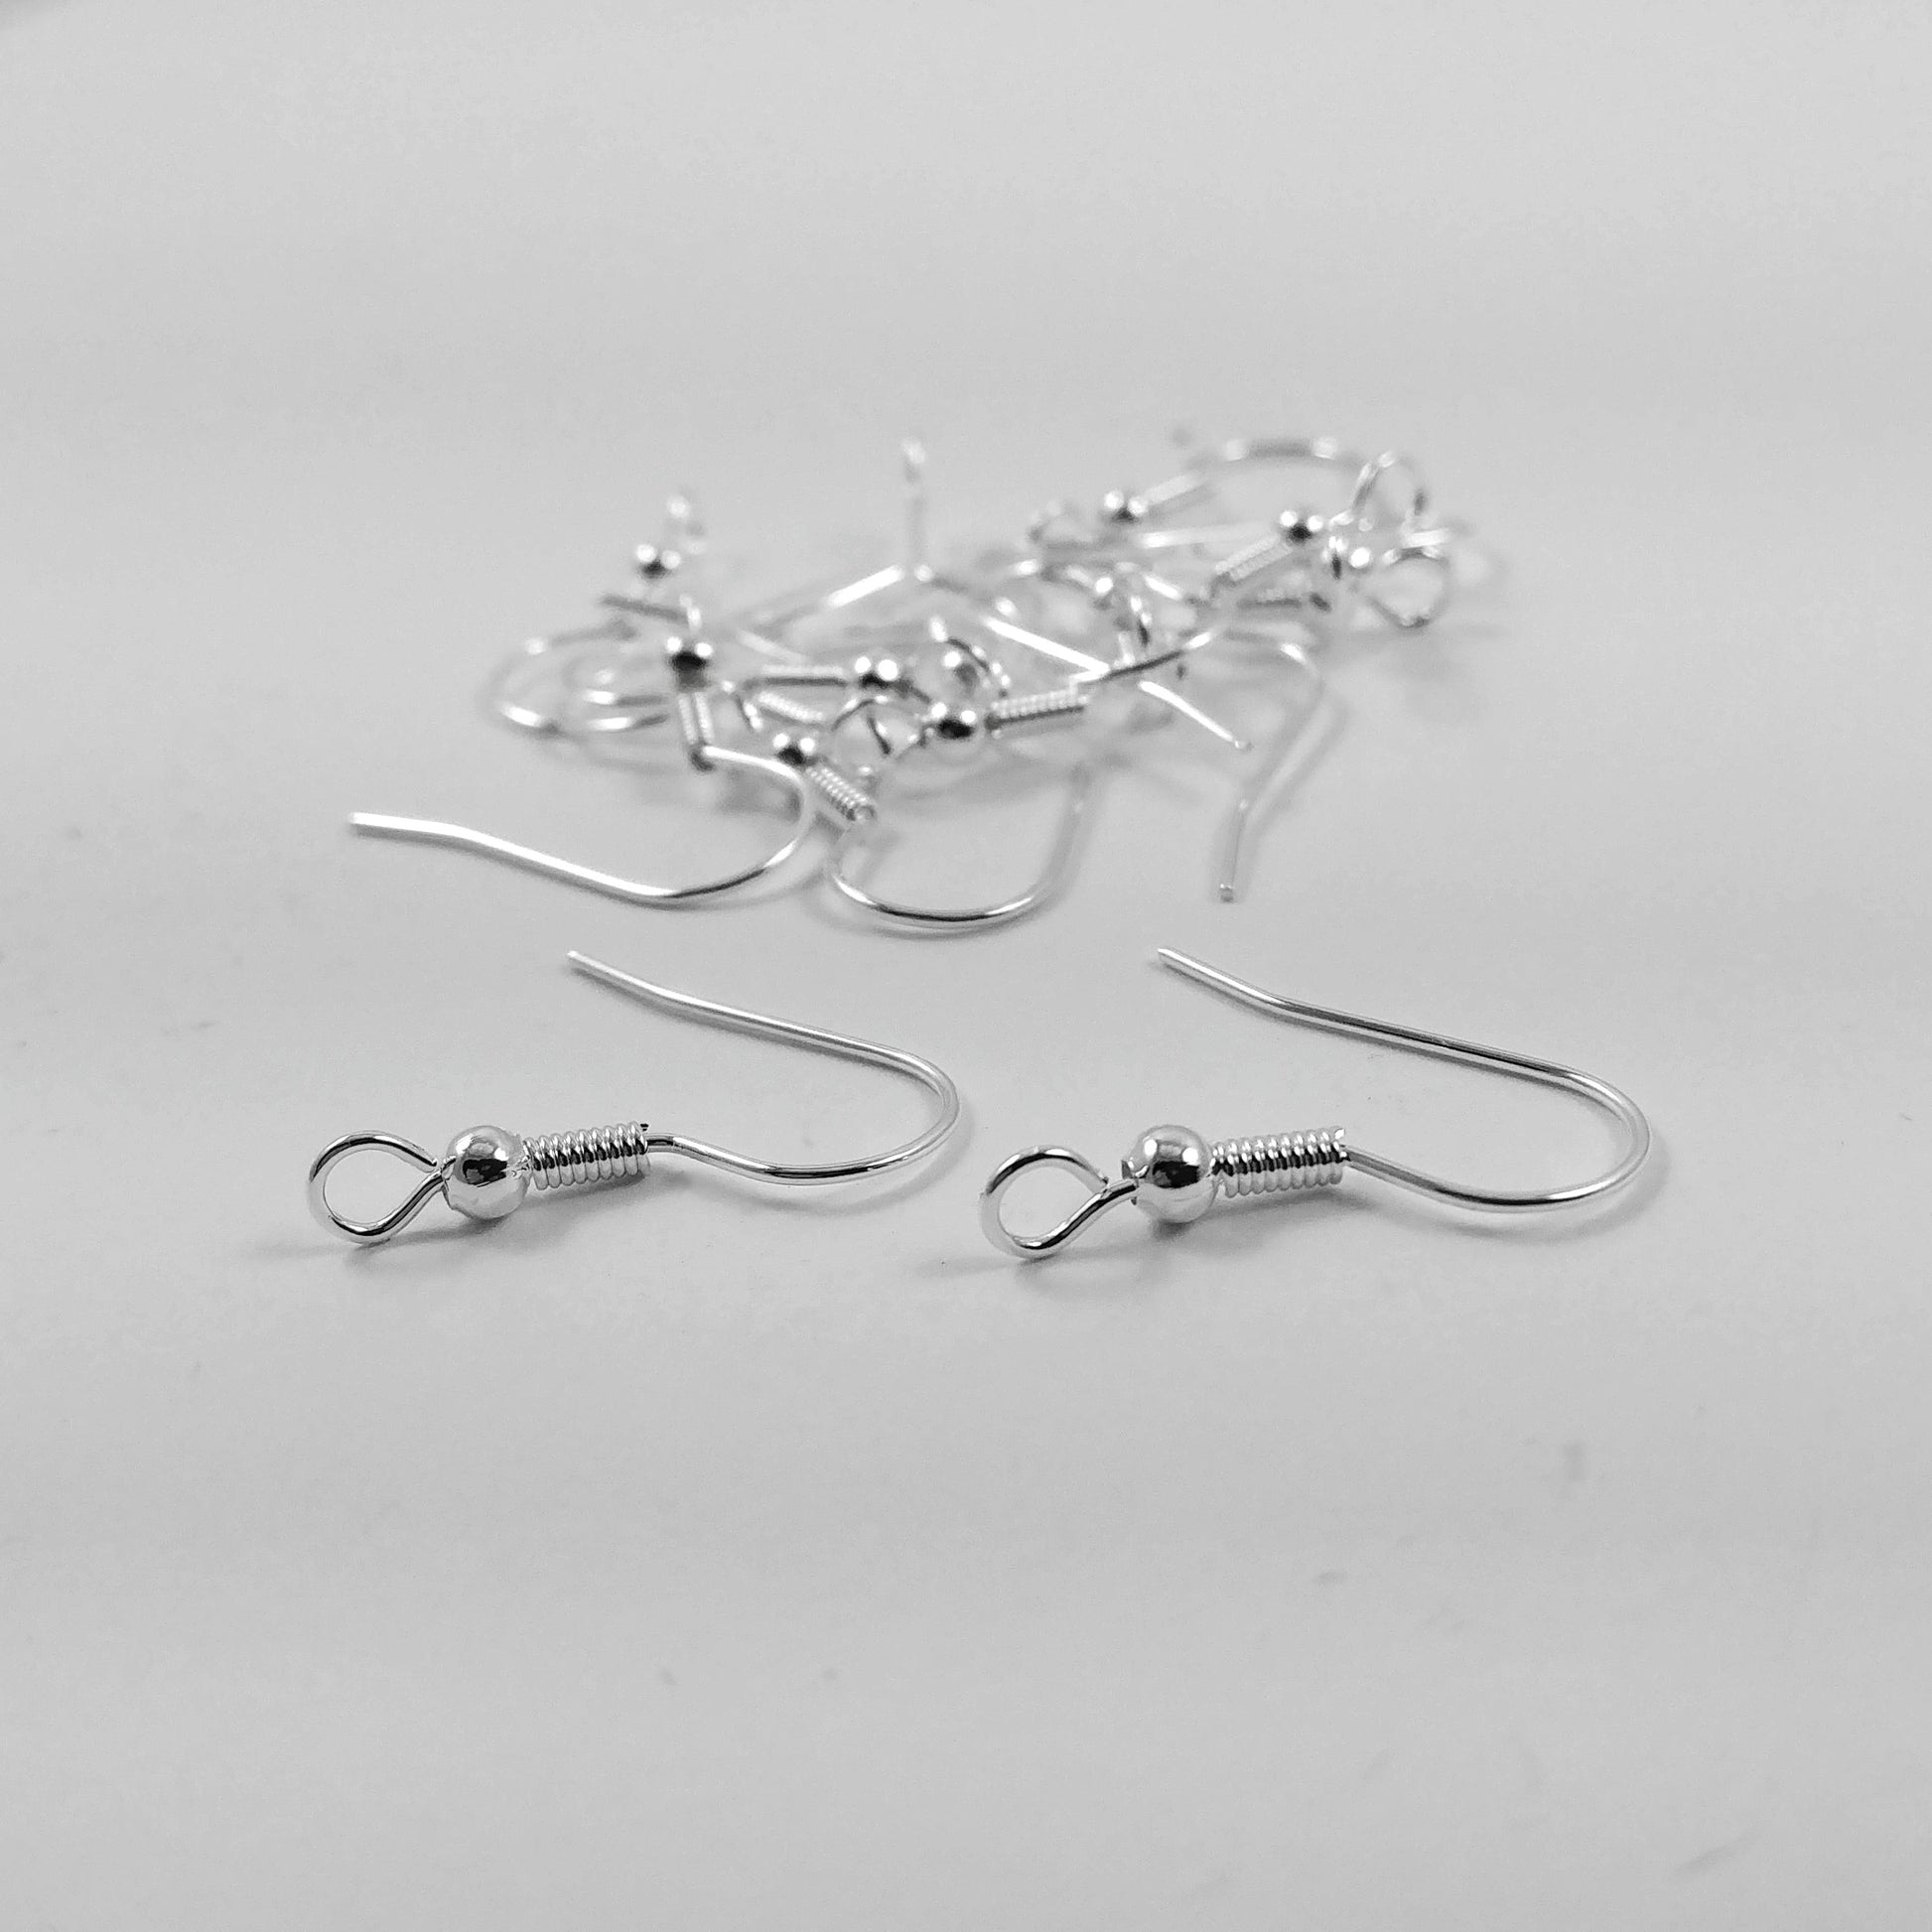 50 Grade A silver plated iron earring hooks